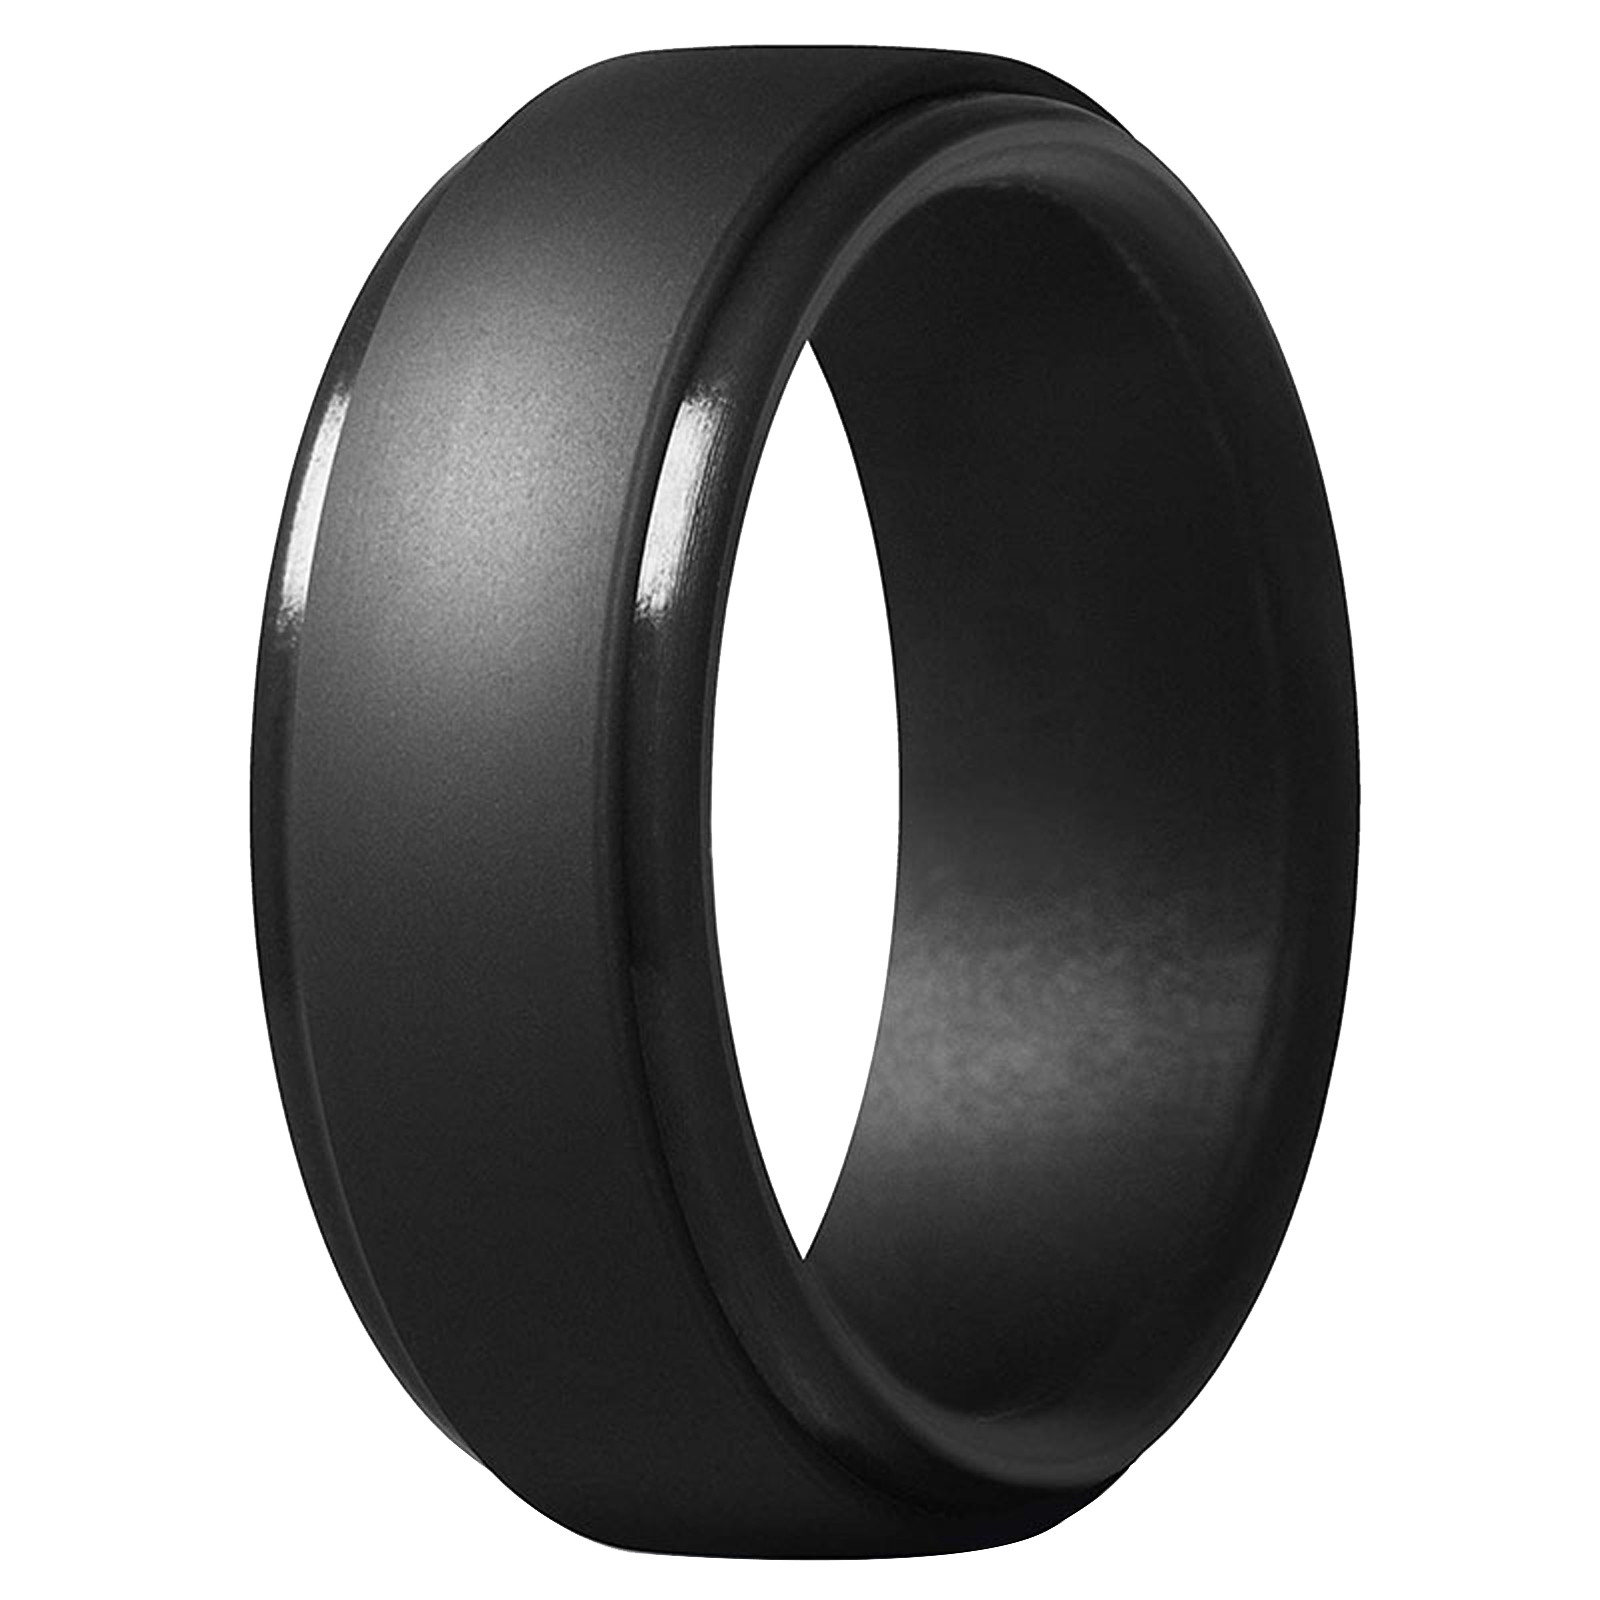 zttd personality metallic silicone soft men's double wedding rings ring ...